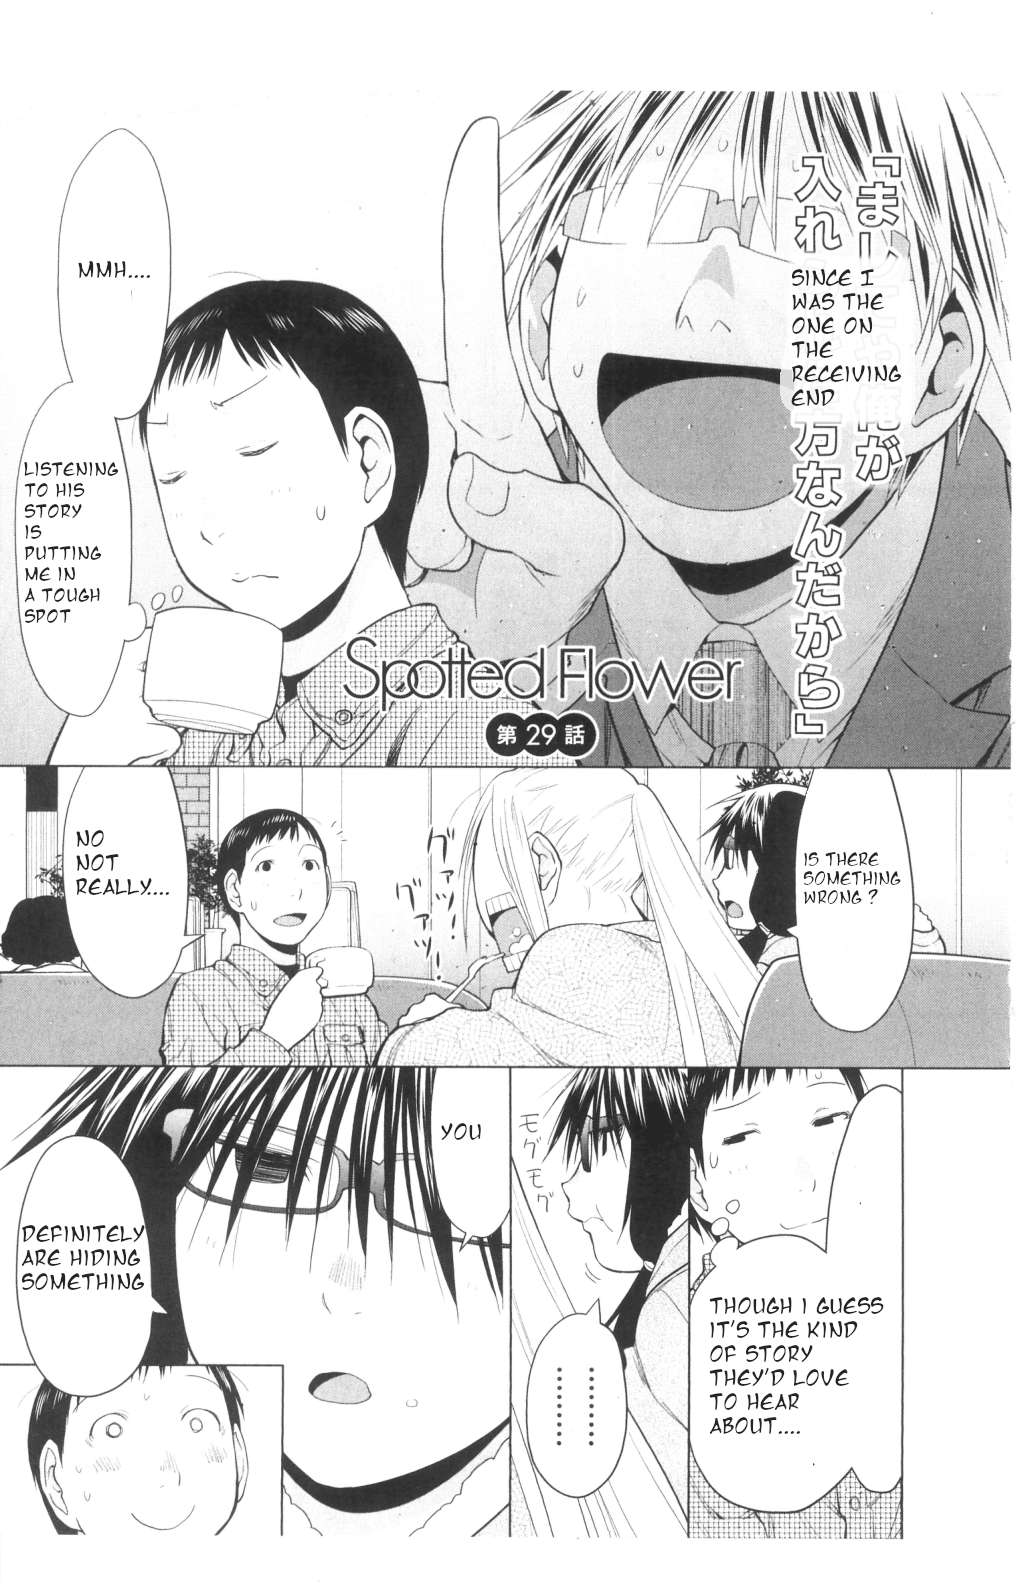 Spotted Flower - chapter 29 - #1